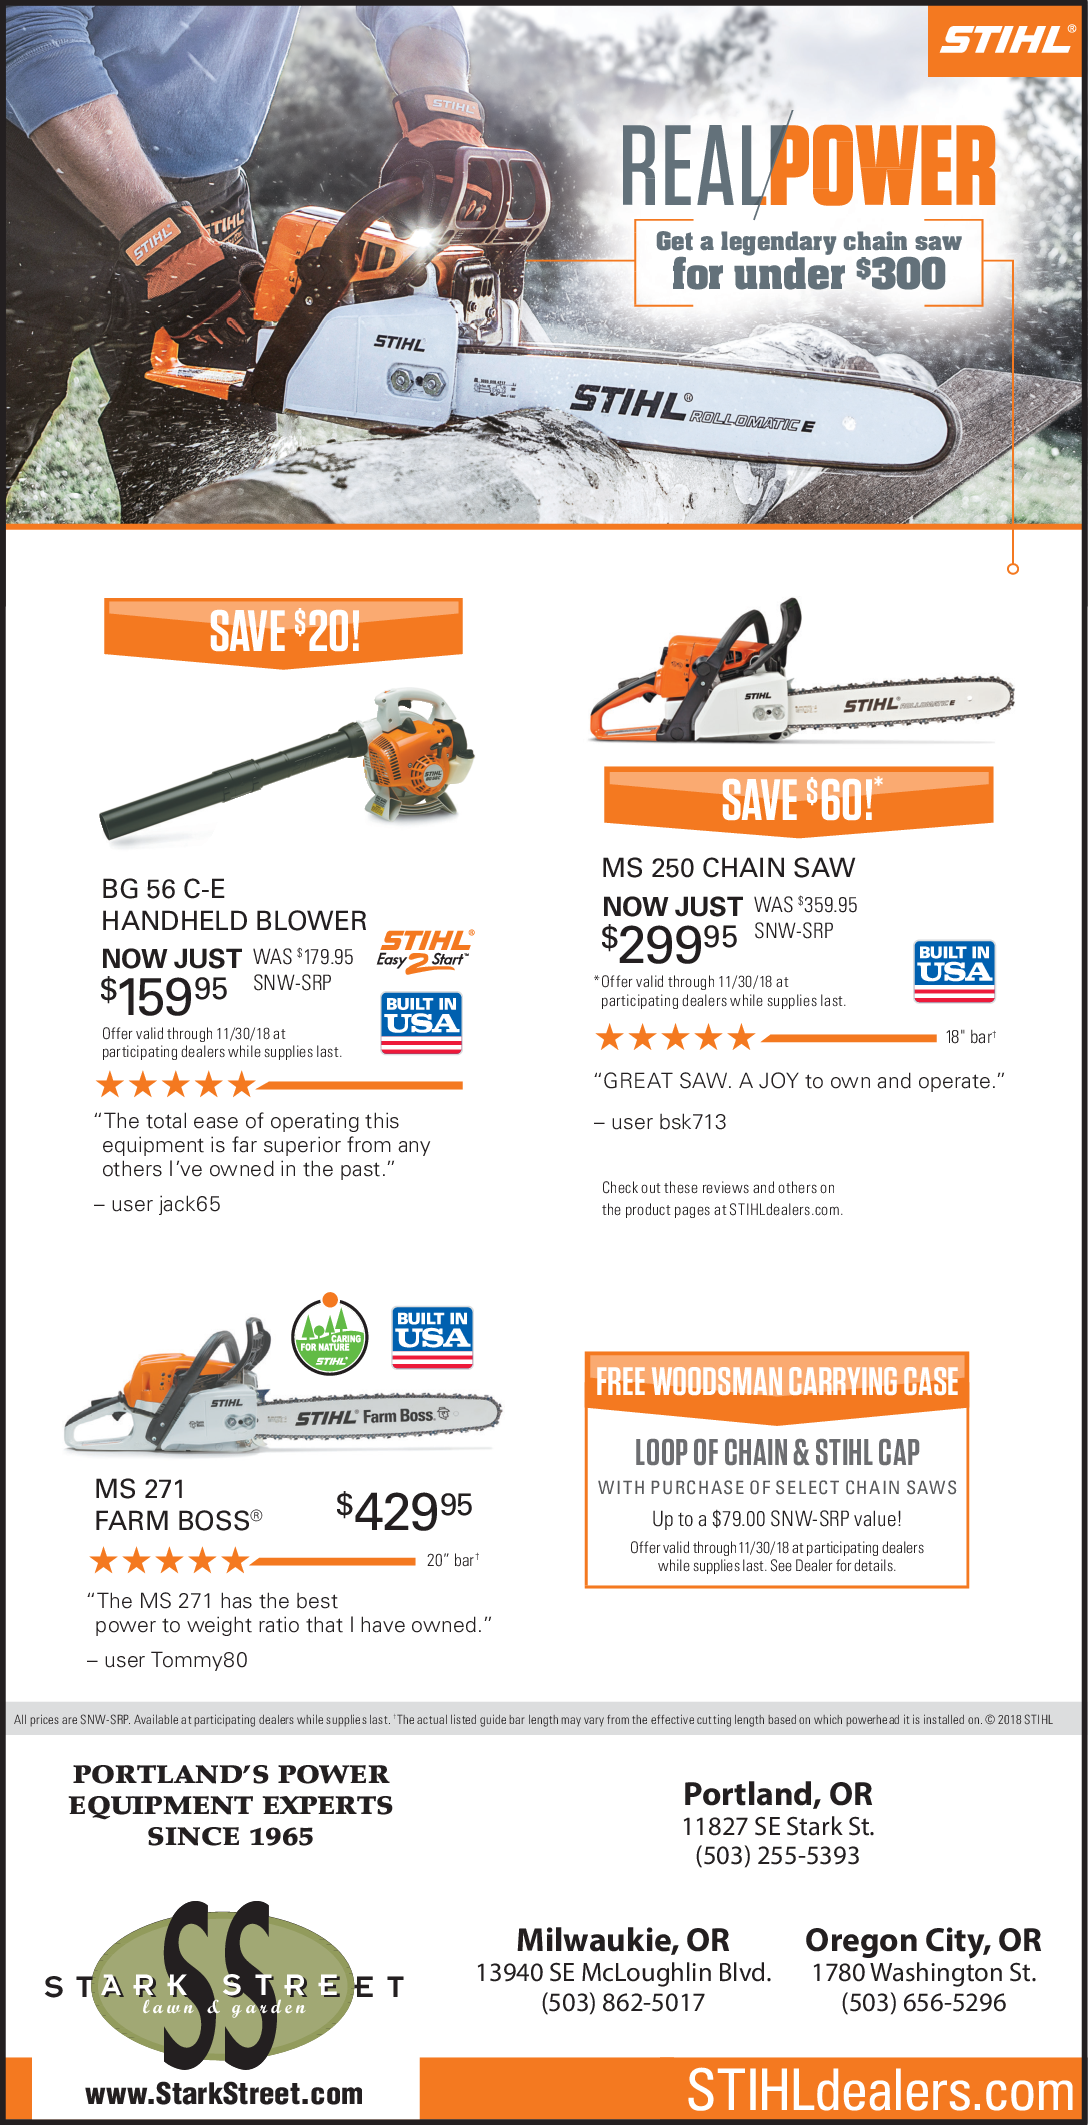 Loop Of Chain Stihl Cap With Purchase Of Select Chain Saws In